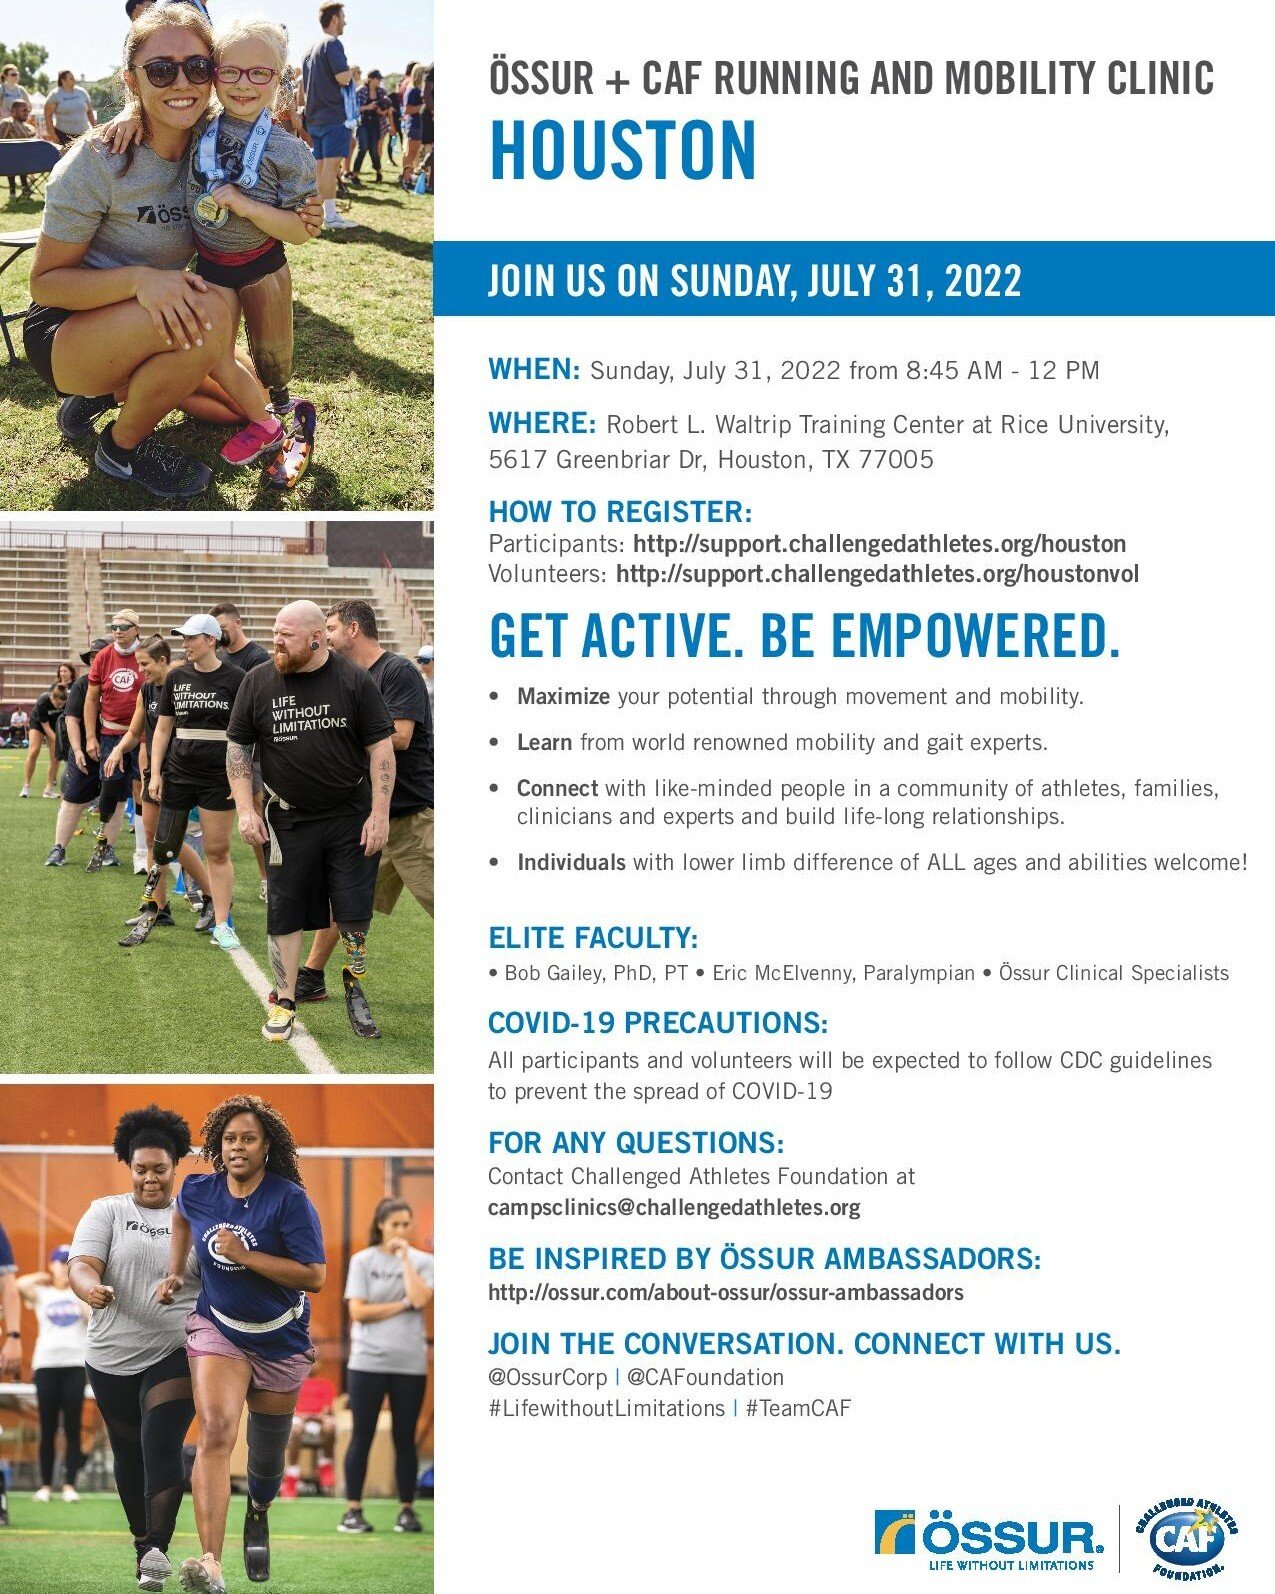 Mark your calendars! 🗓️⠀
The @CAFoundation  and @ossur  are hosting a running and mobility clinic in #Houston on July 31. Registration is now open (and FREE) for this lifechanging event. ⠀
https://bit.ly/3FAPRDl